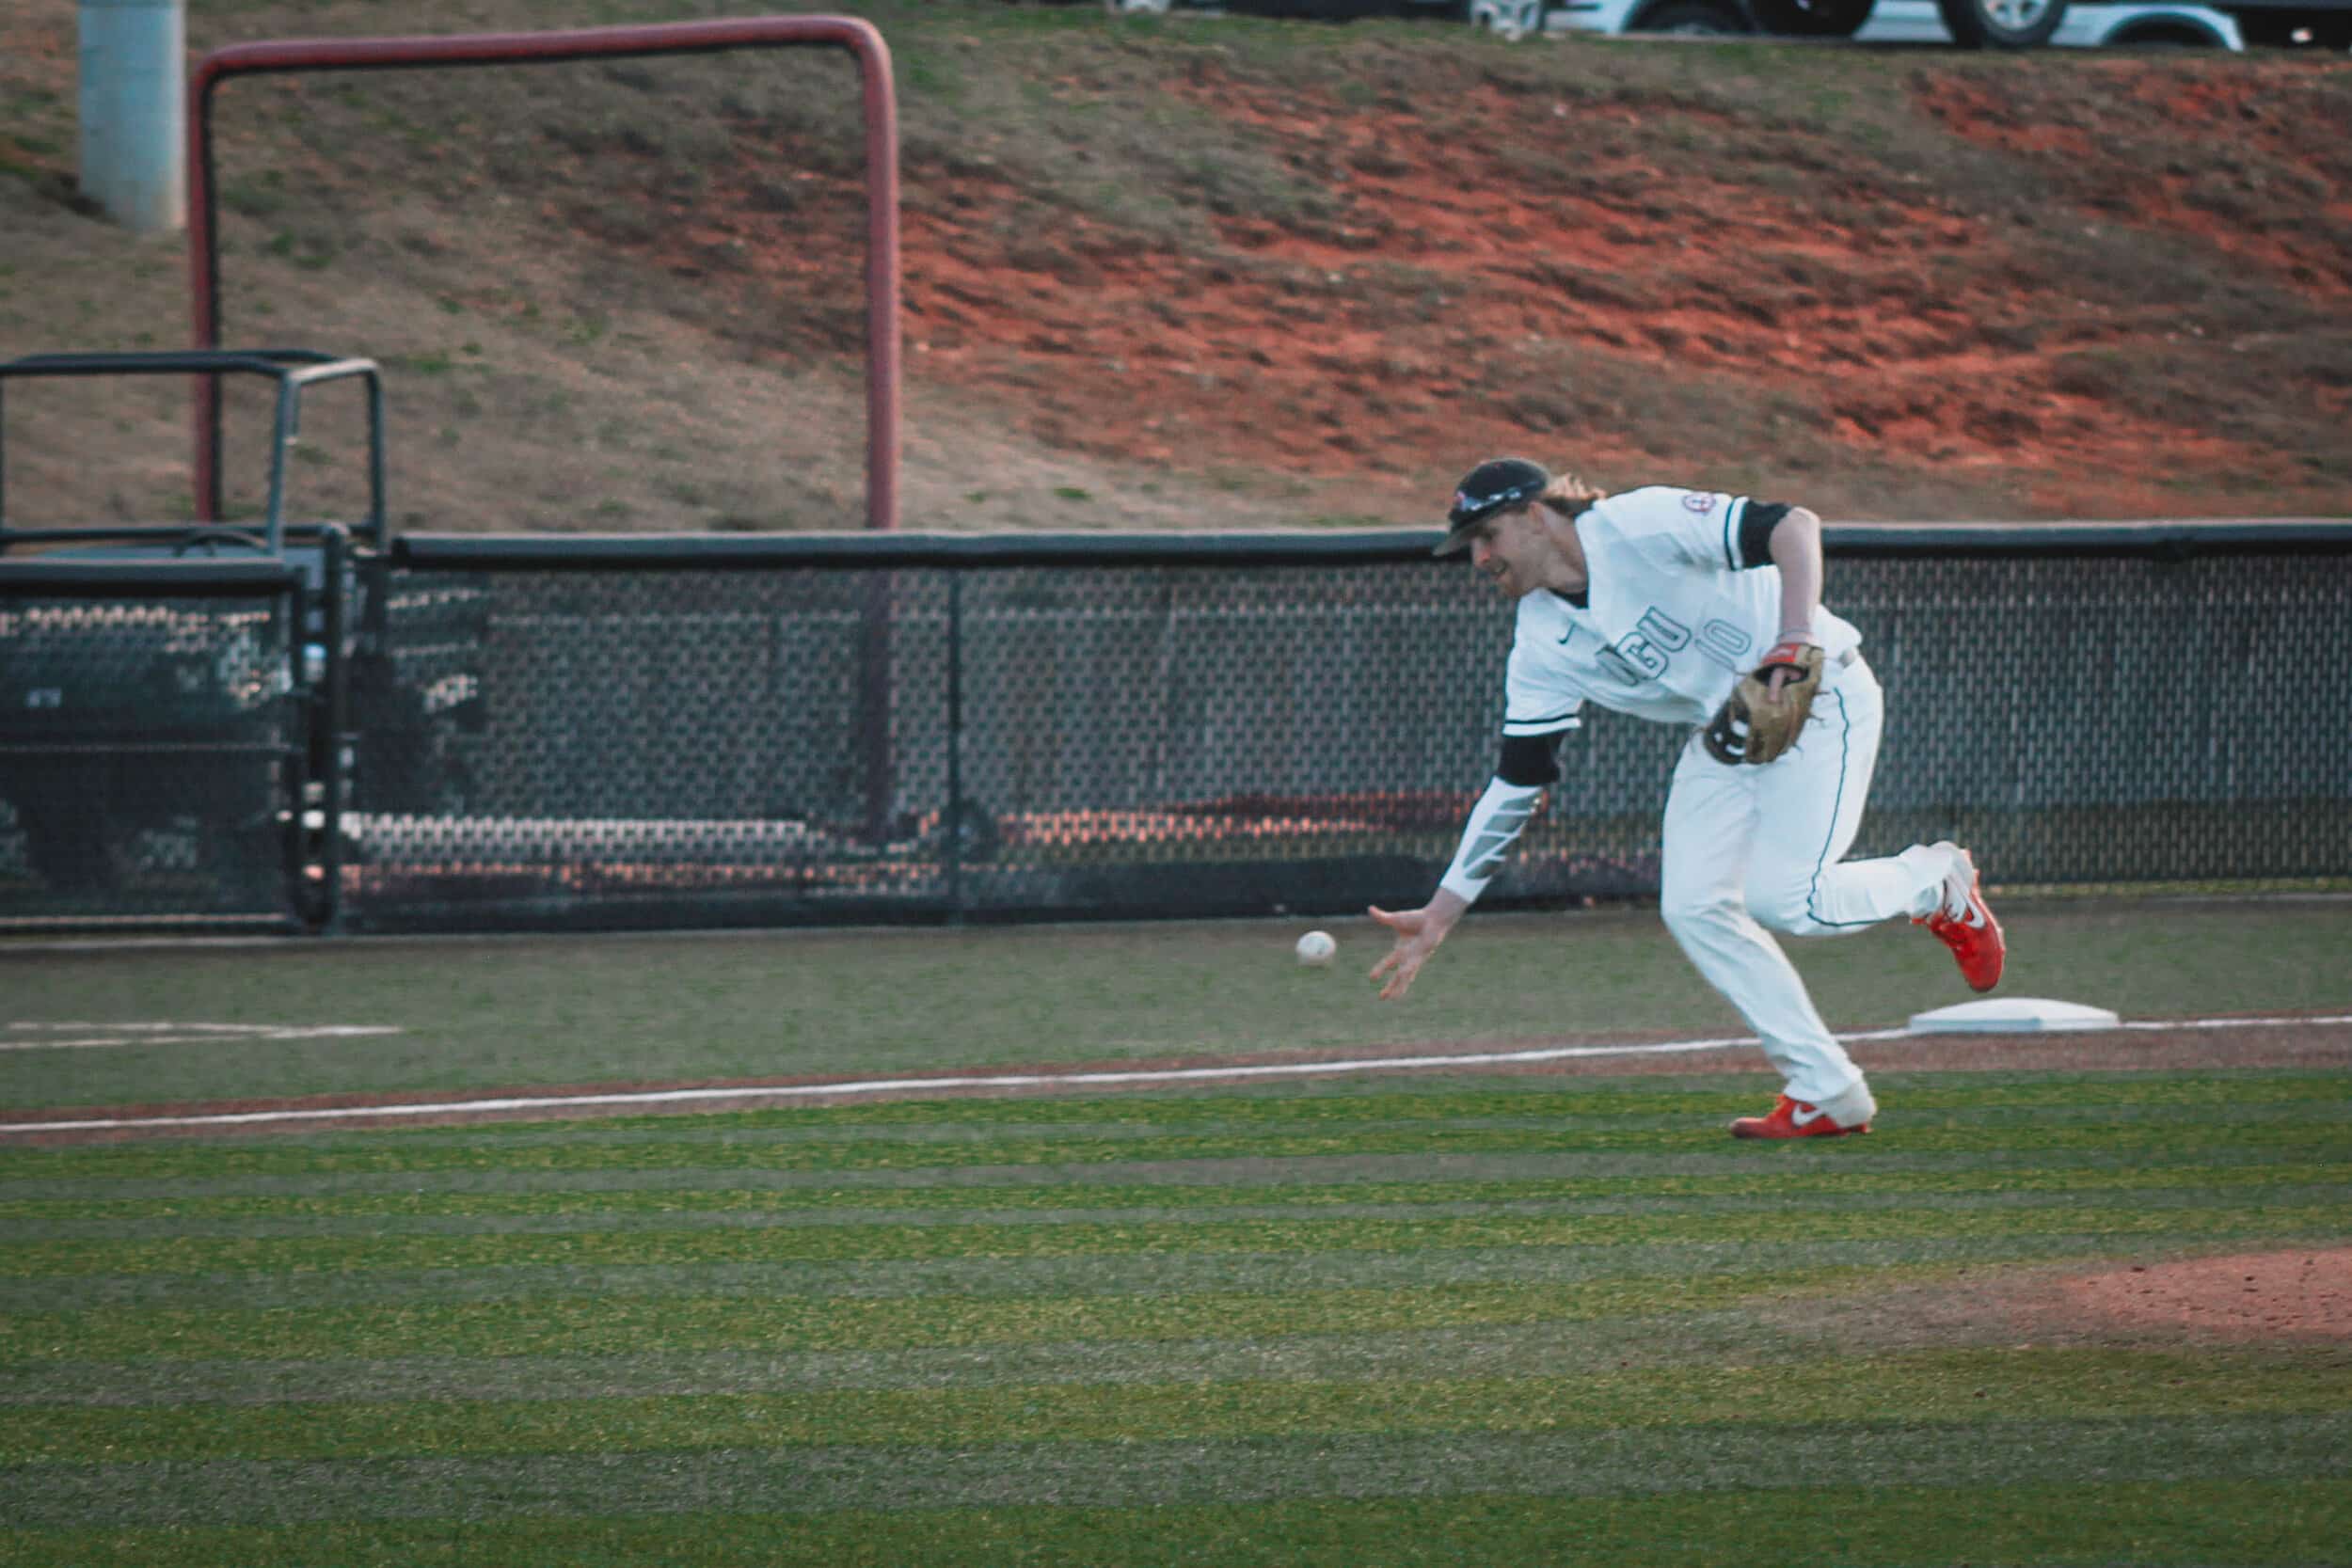 Third baseman Michael Neustifter (10), attempts to catch a ground ball hit down the third base line.